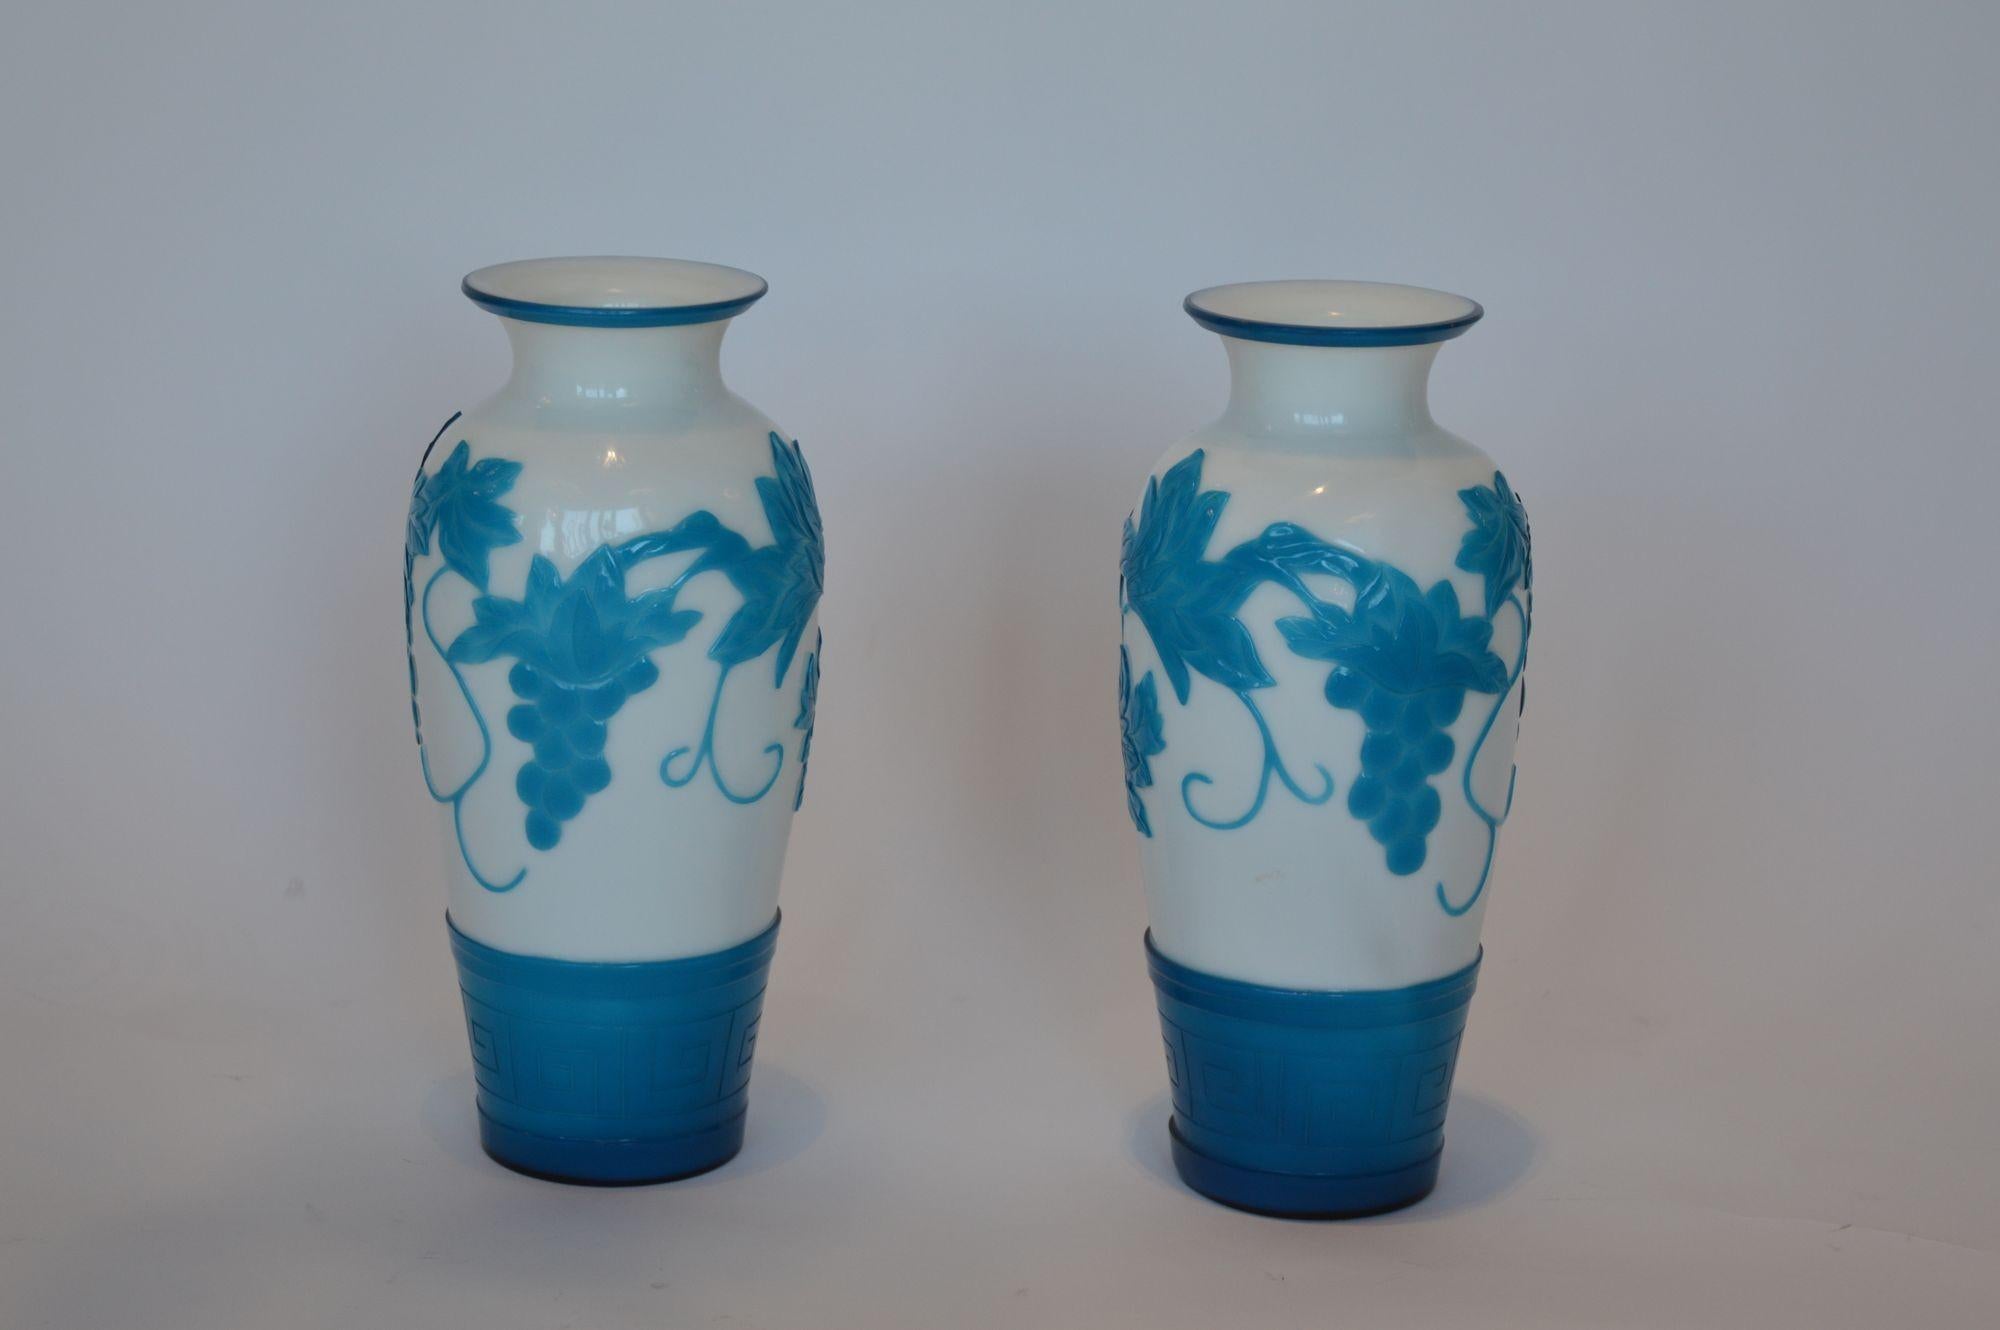 Early 20th century Chinese peking glass is a Chinese Cameo glass.